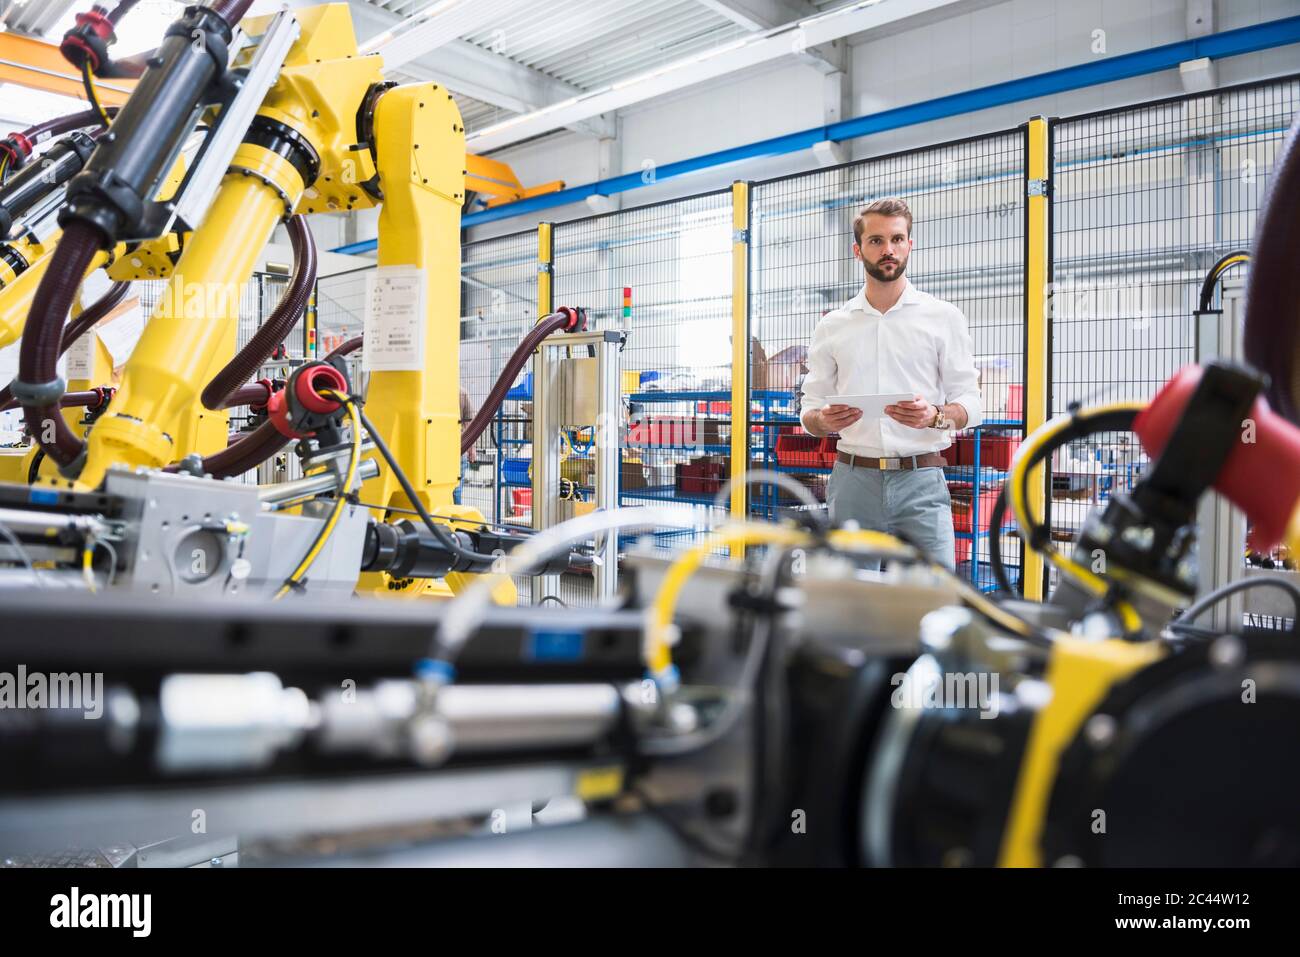 Male robotics expert standing by computer-aided manufacturing technology at factory Stock Photo